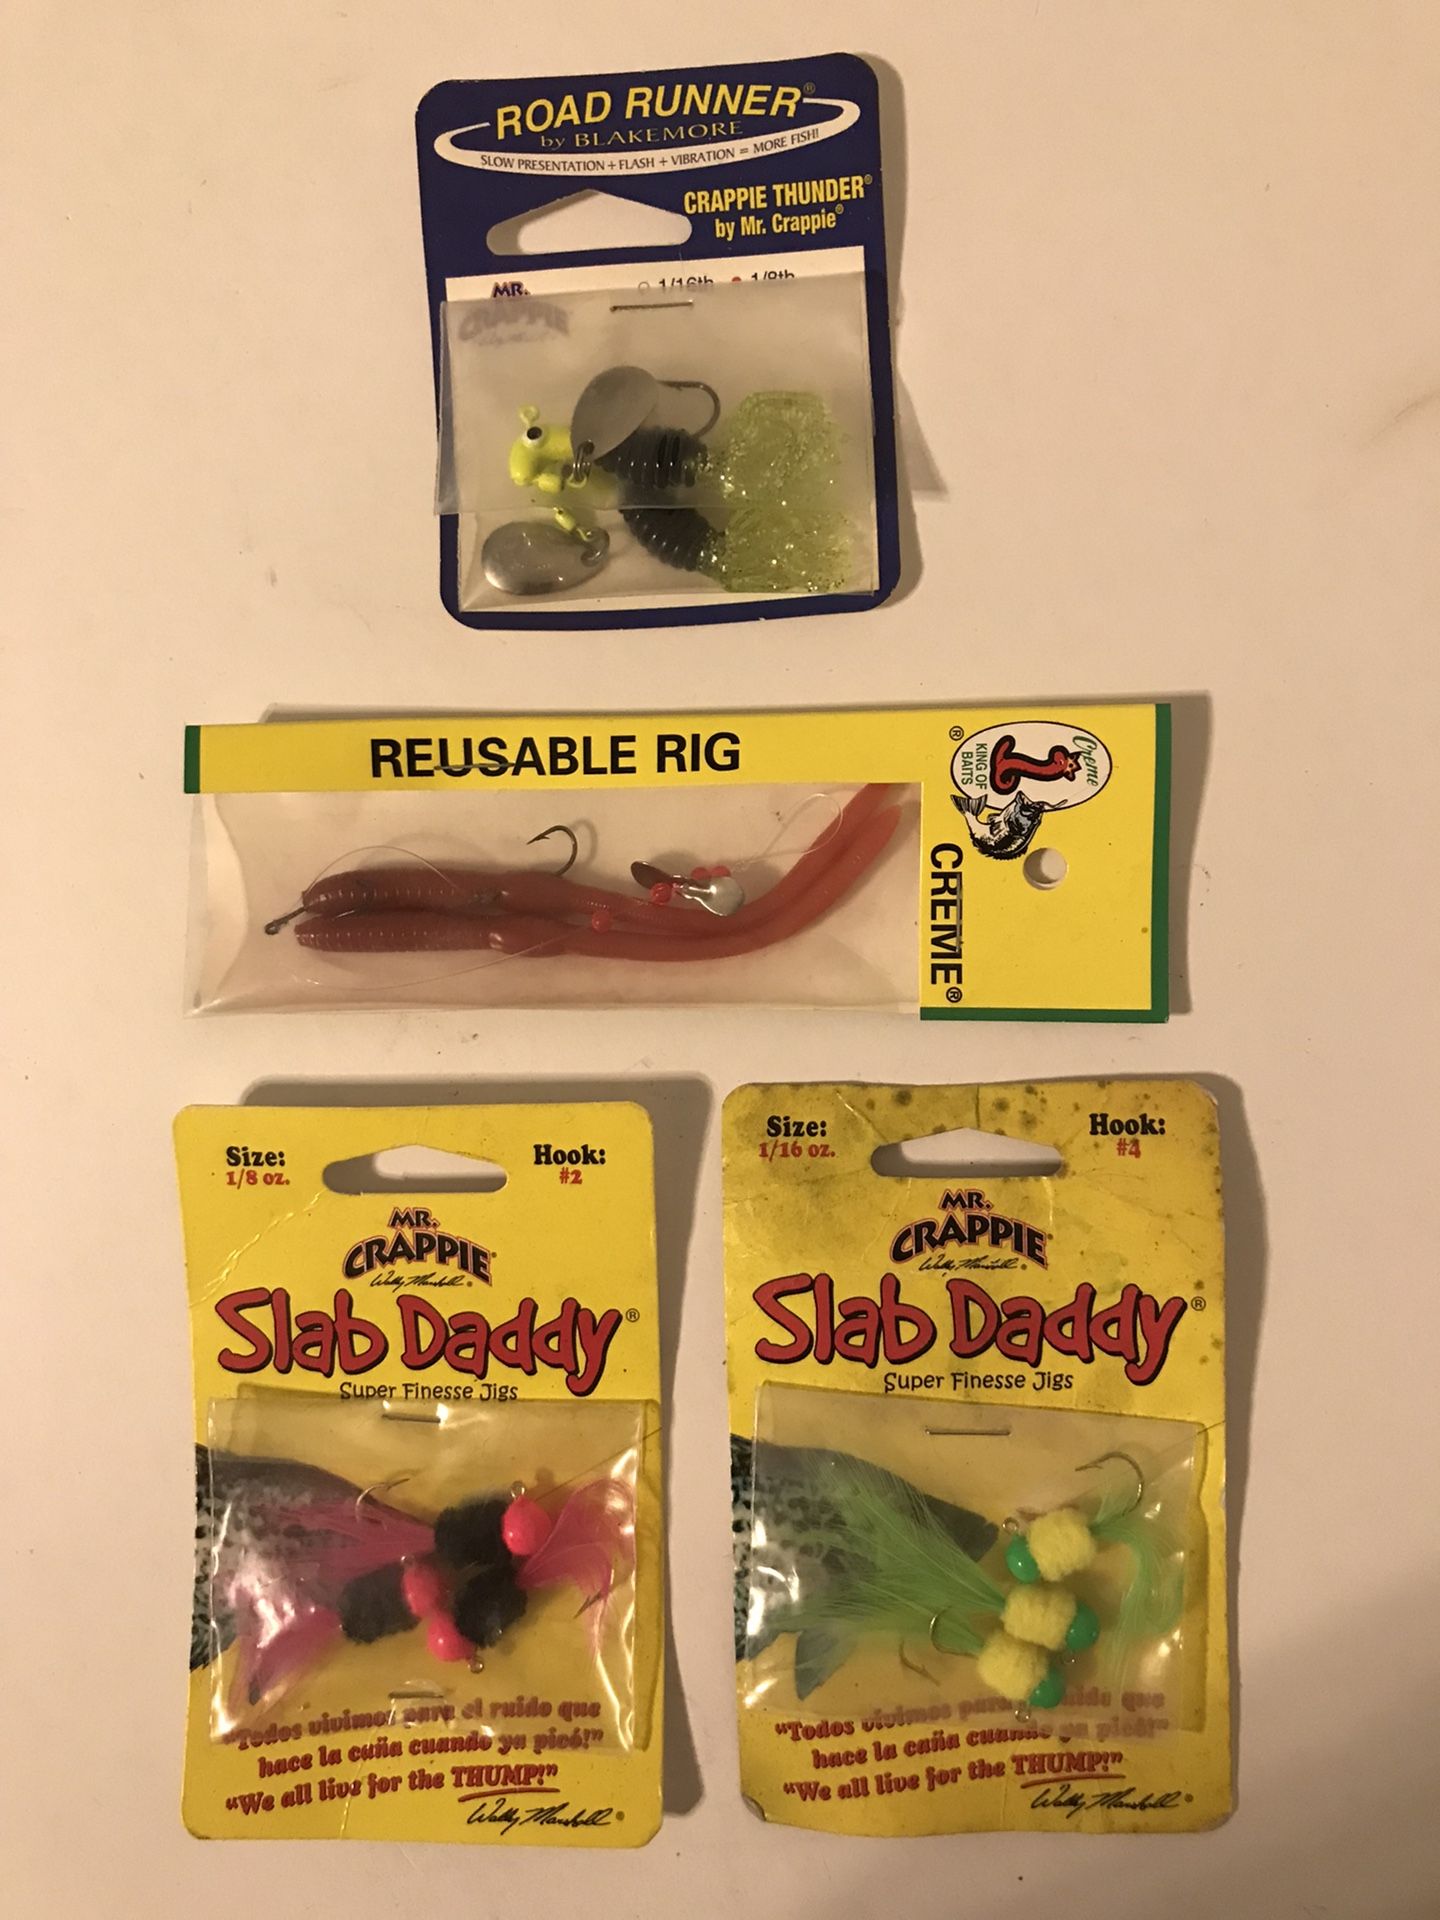 Mr. Crappie Slab Daddy, Crappie Thunder, & 1 Creme Reusable Rig 2 Worms